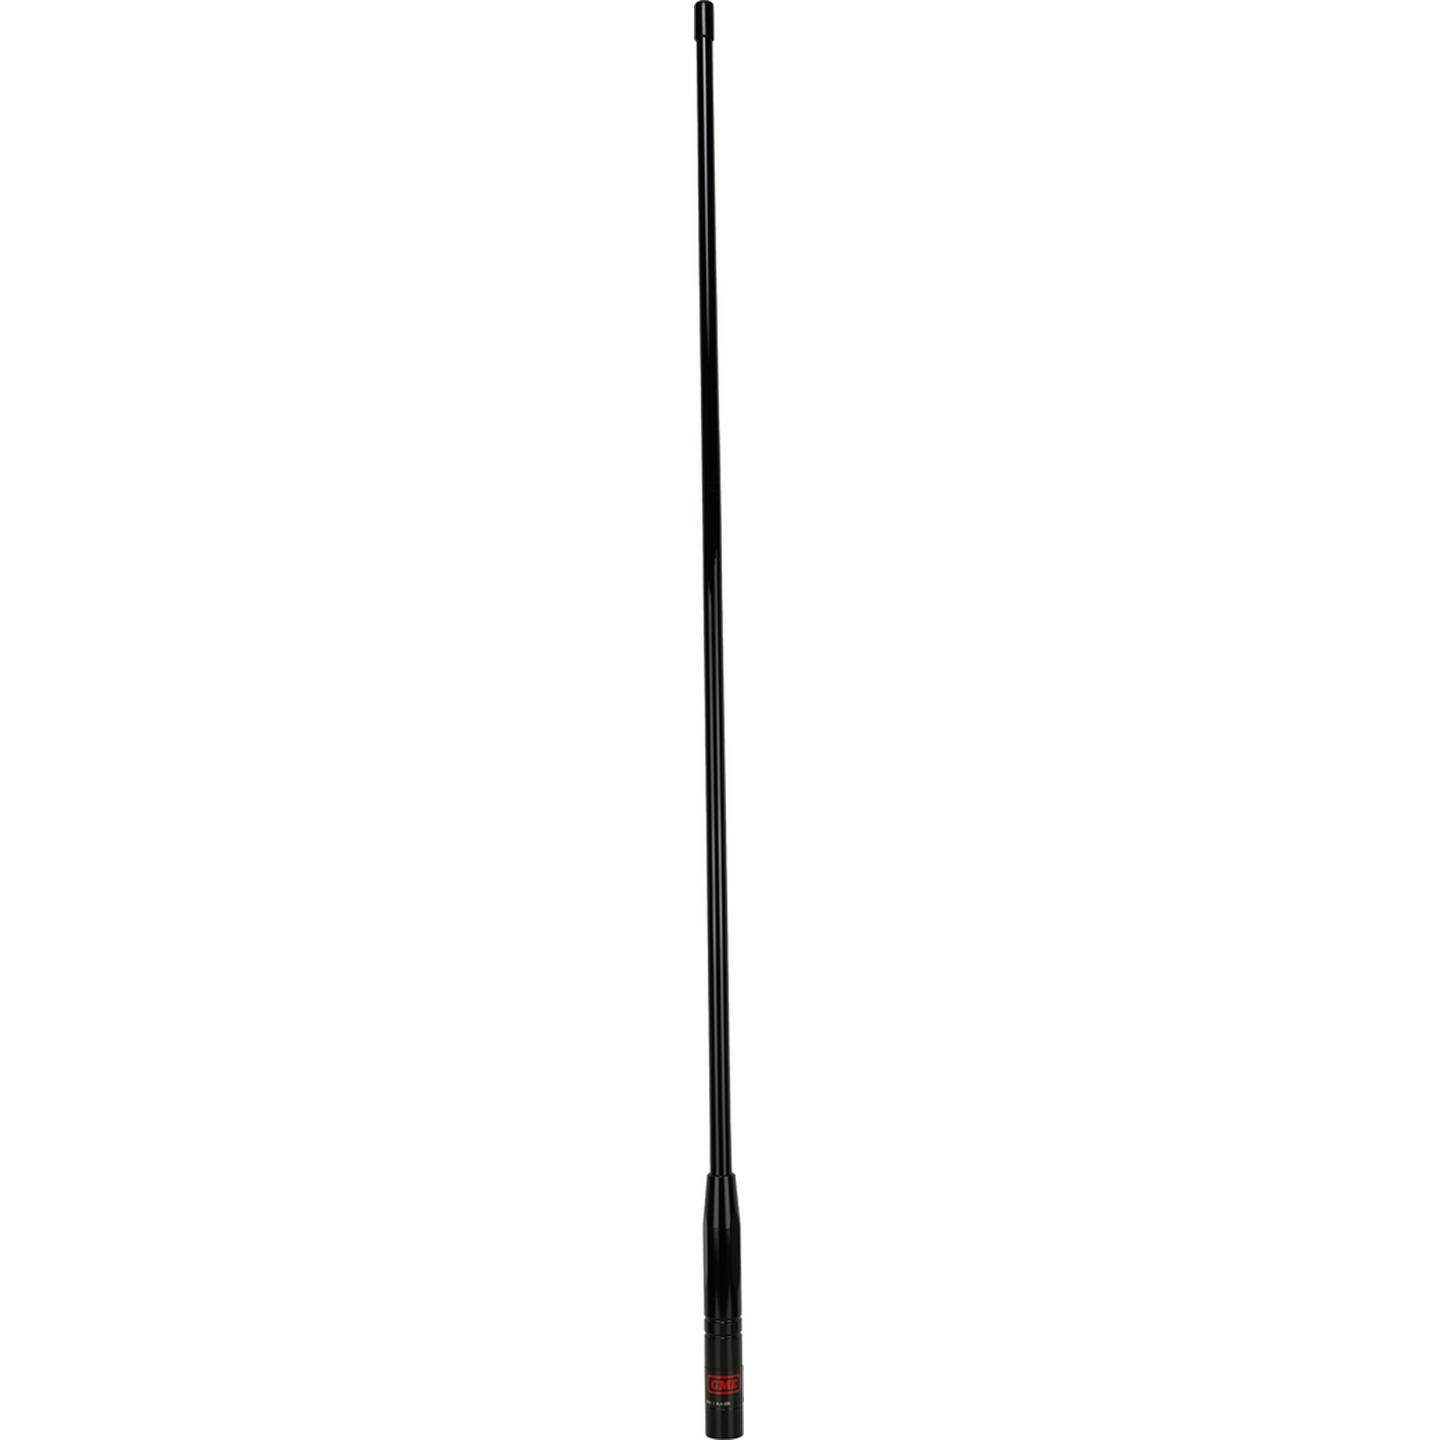 GME Antenna Whip - Suit AE4702 - Black